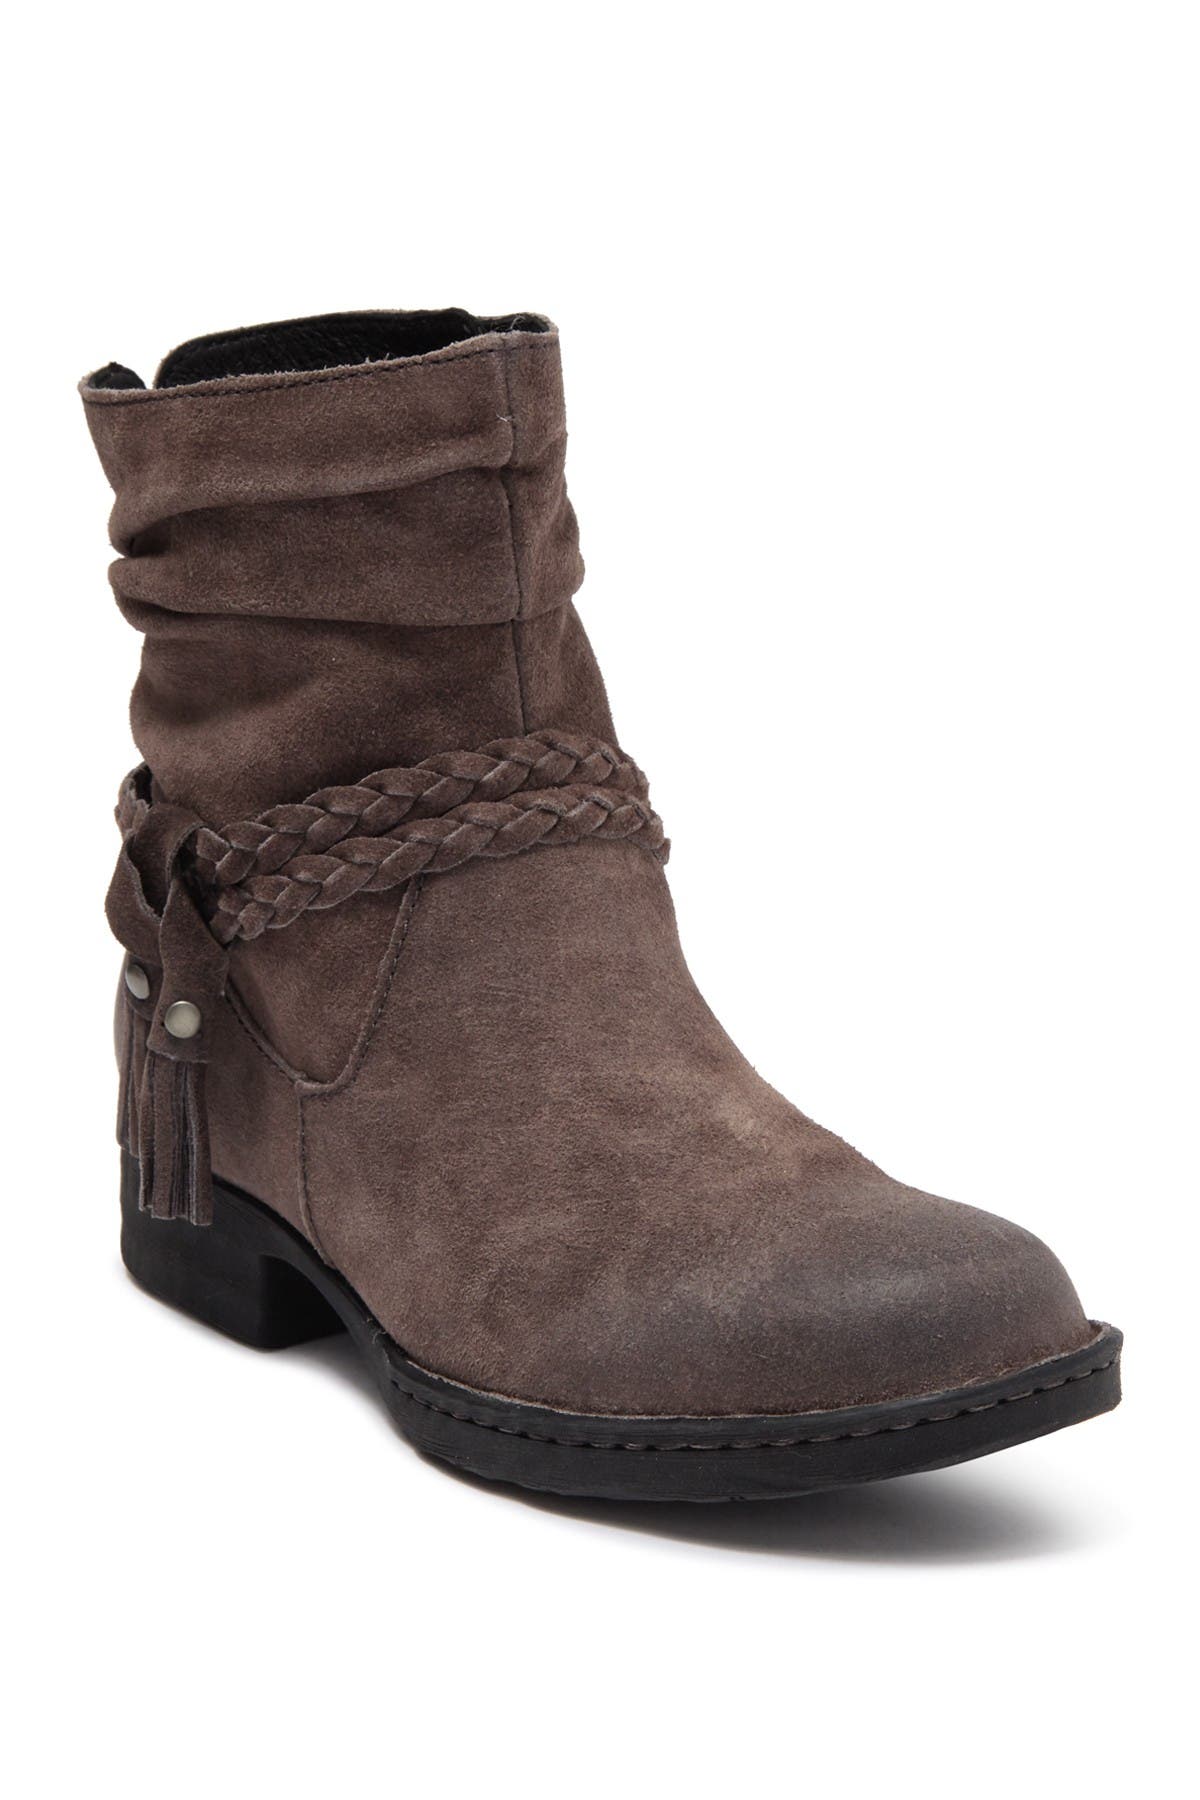 born slouch boots